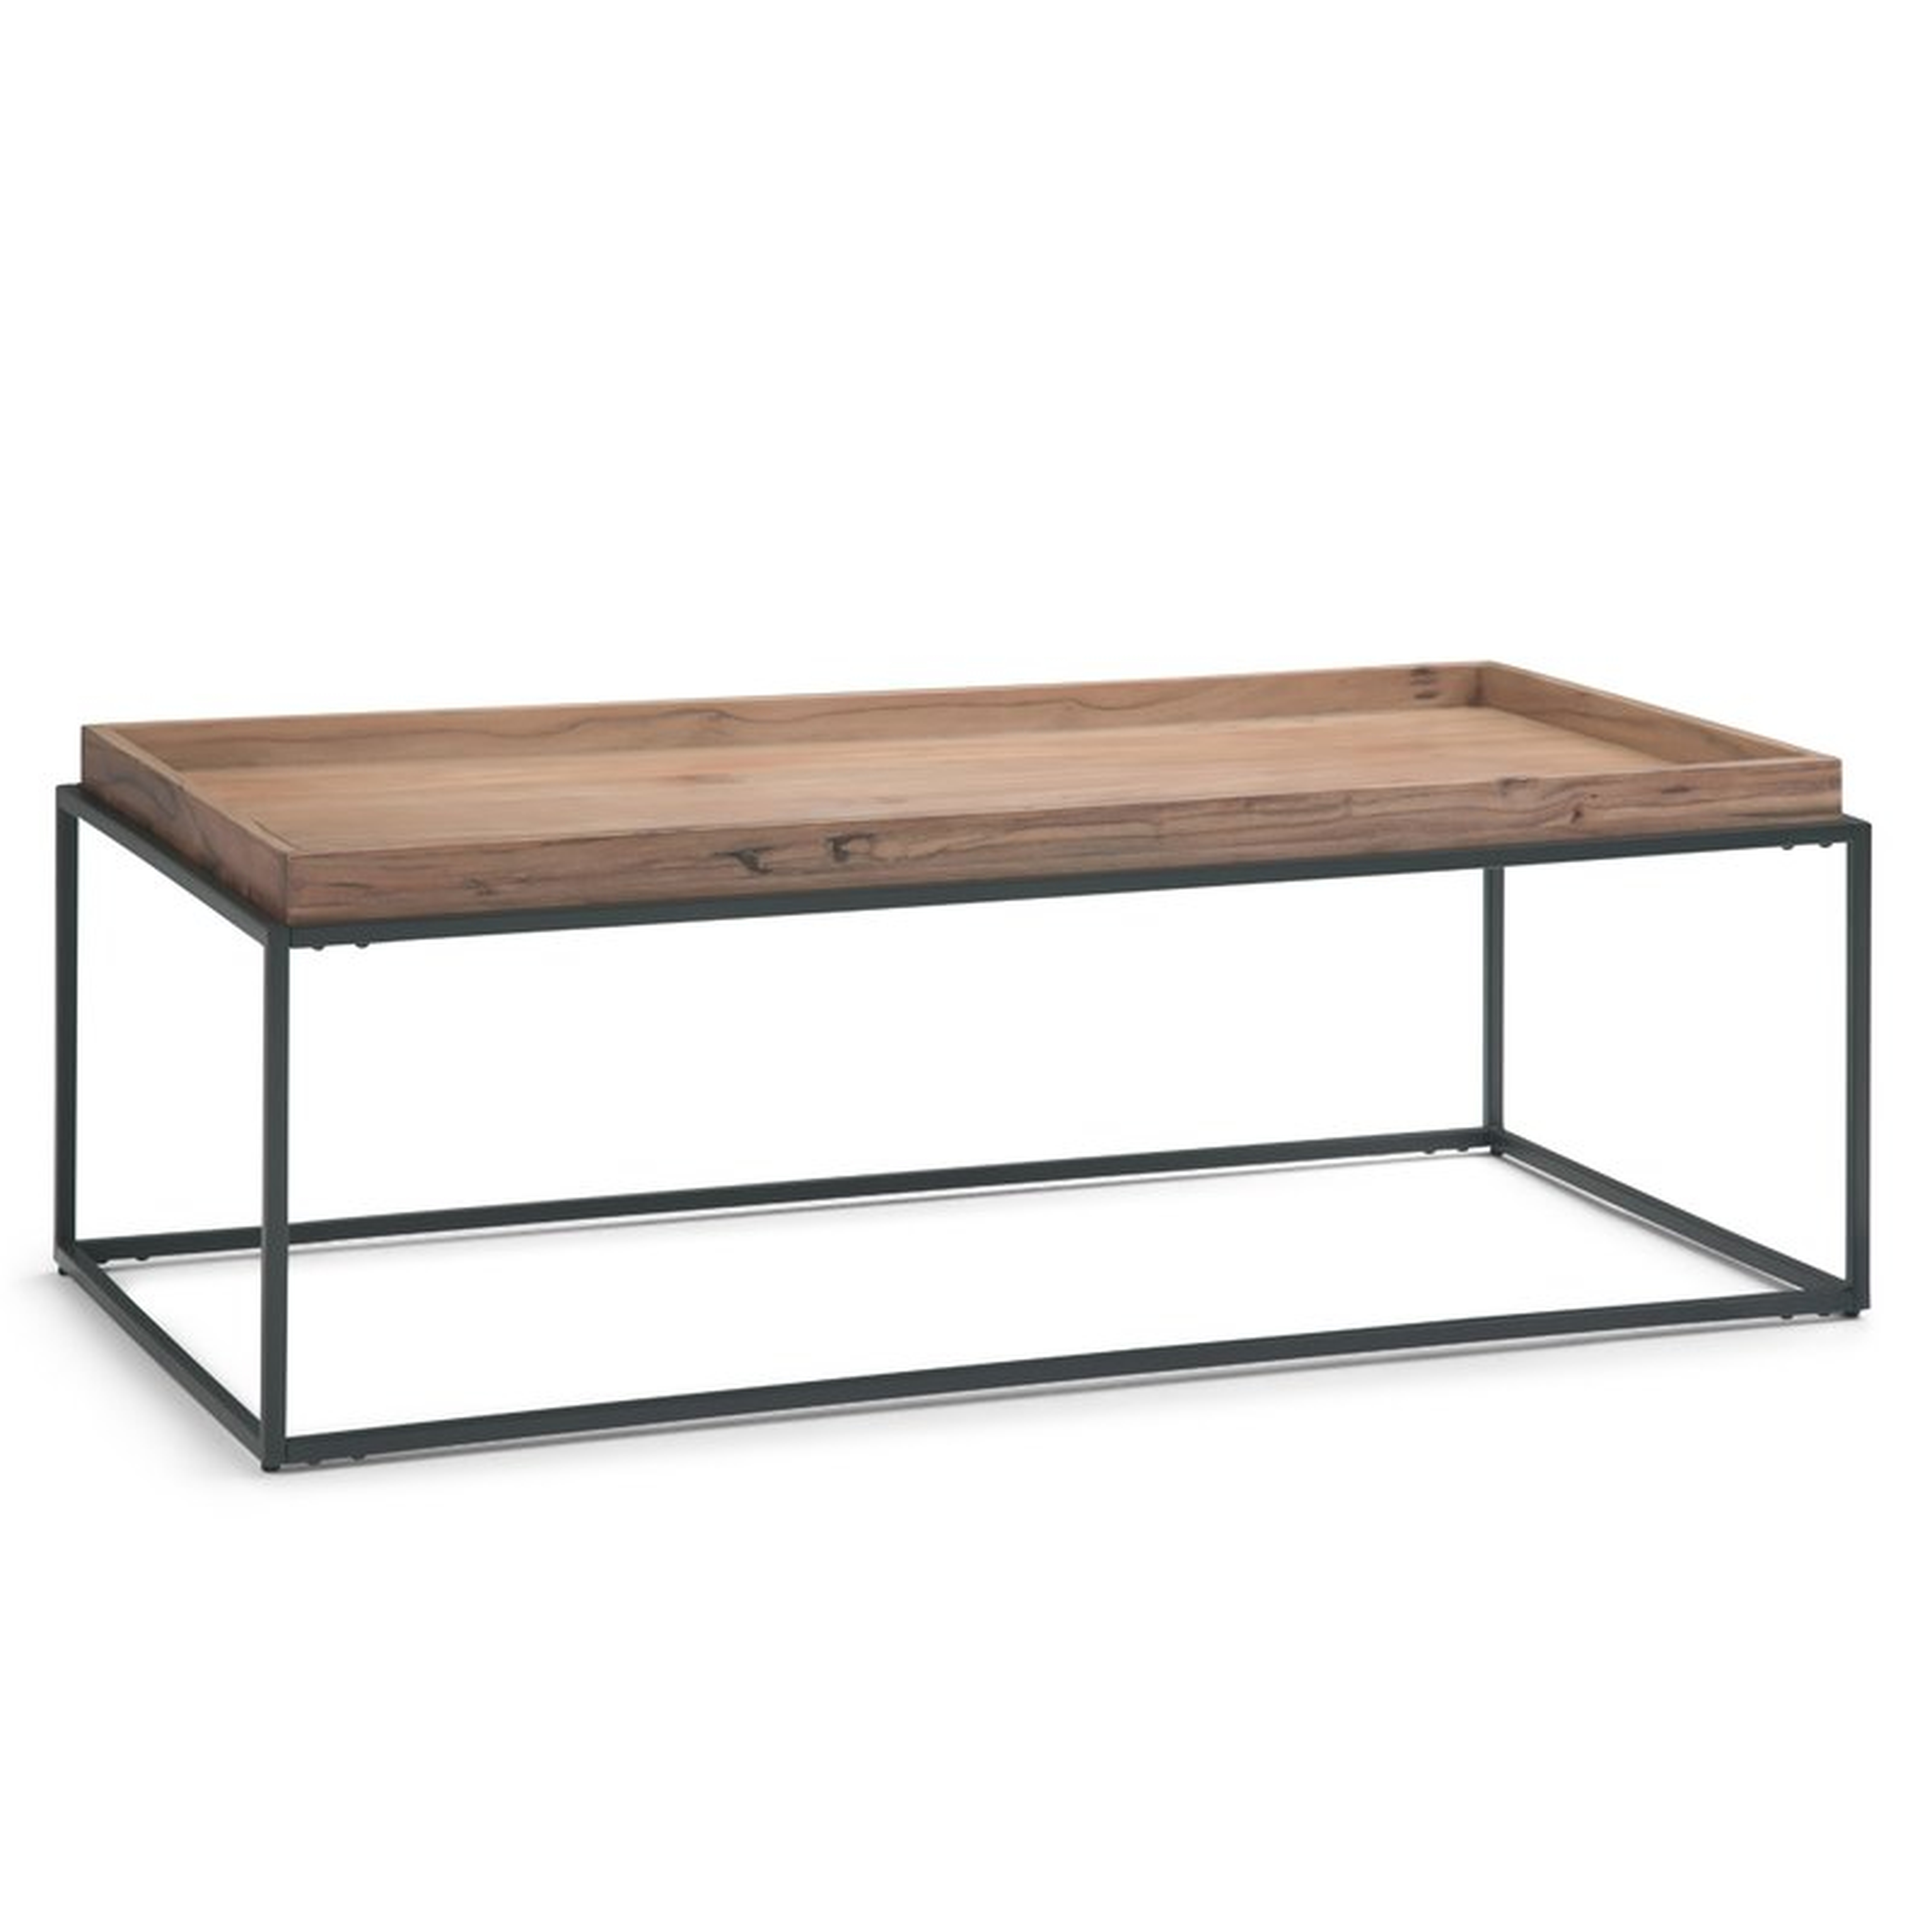 Spruill Coffee Table with Tray Top - Wayfair